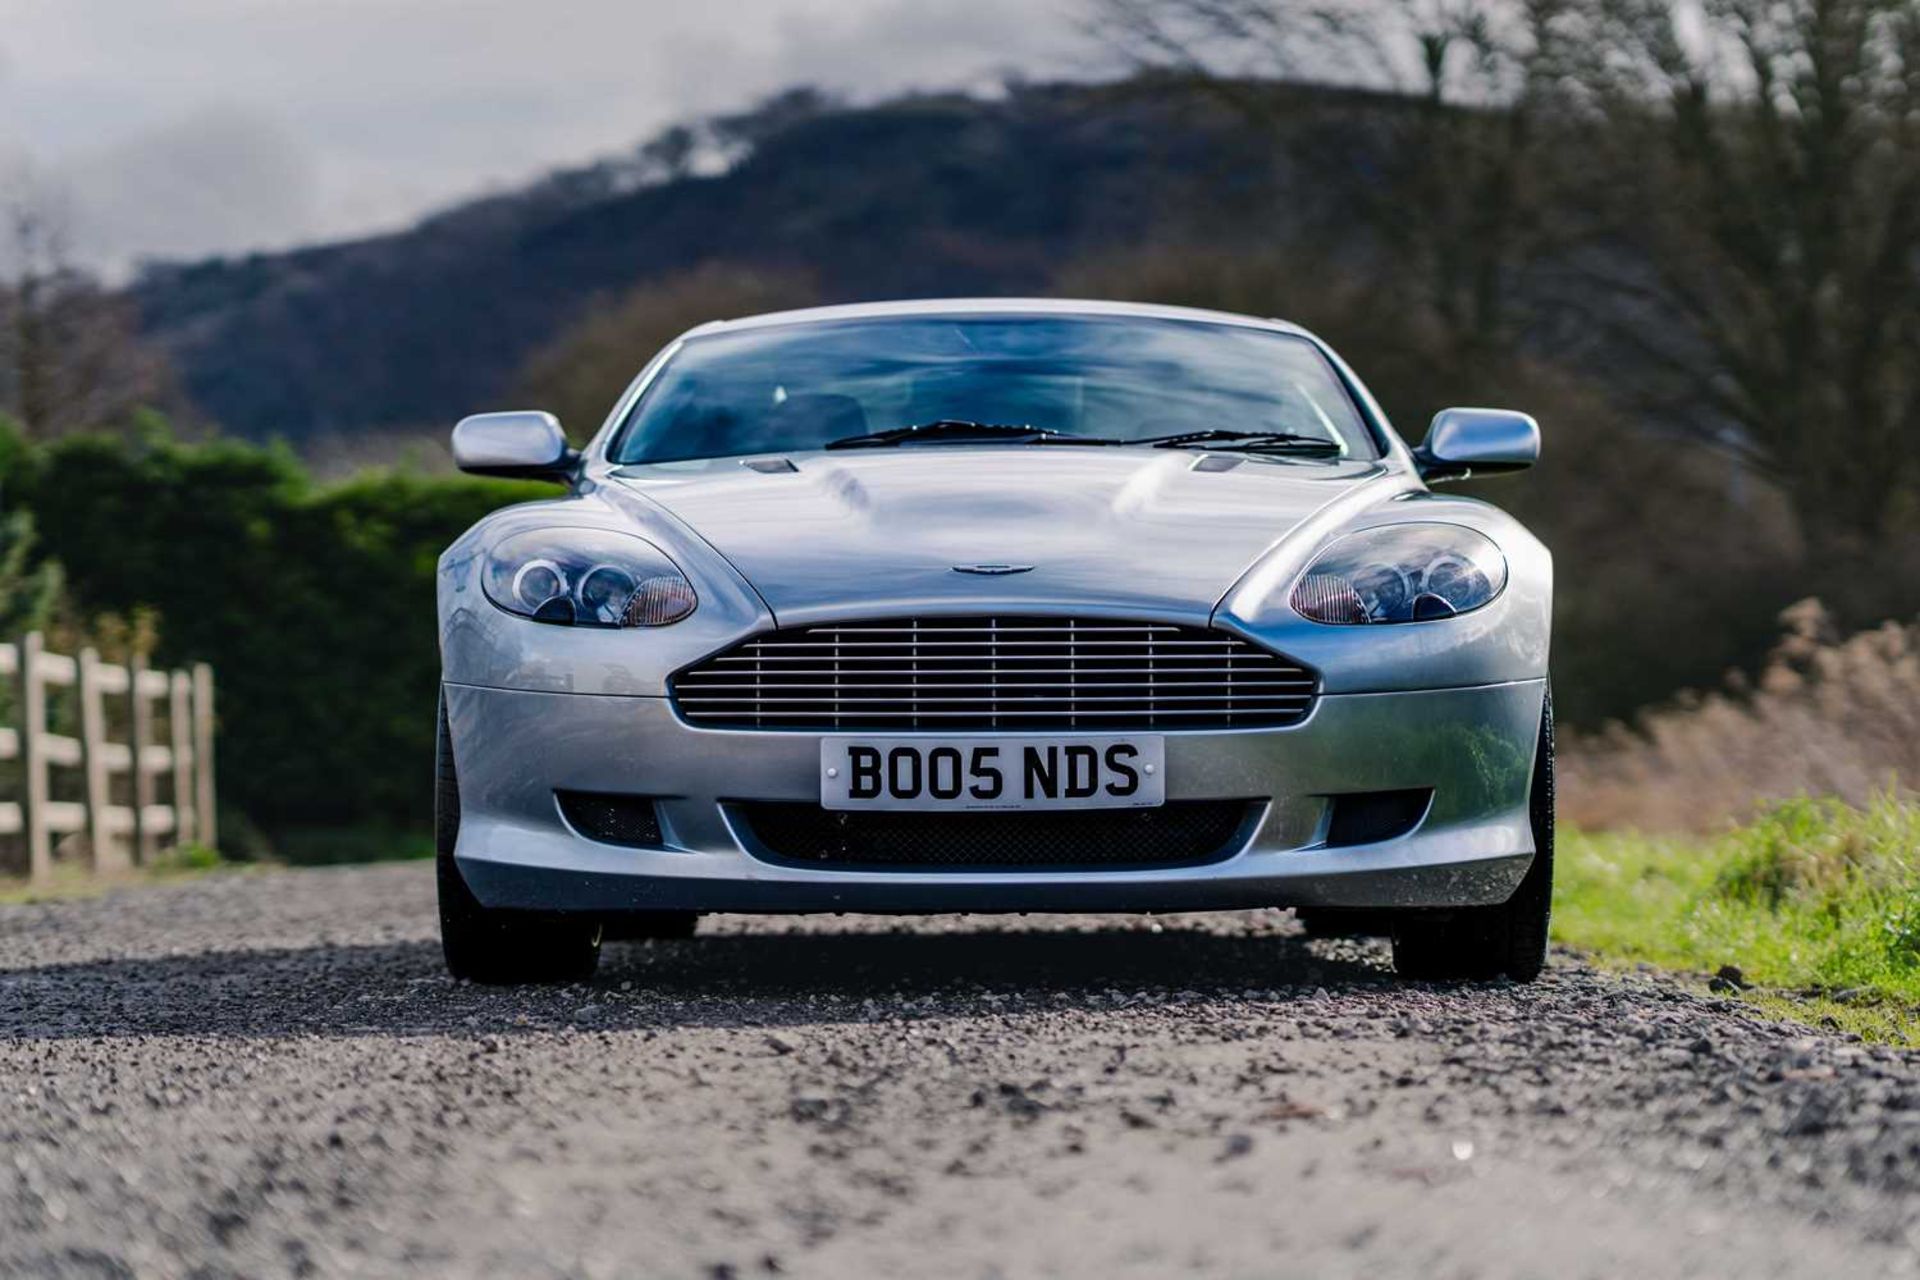 2005 Aston Martin DB9 V12 Only 33,000 miles with full Aston Martin service history - Image 3 of 70